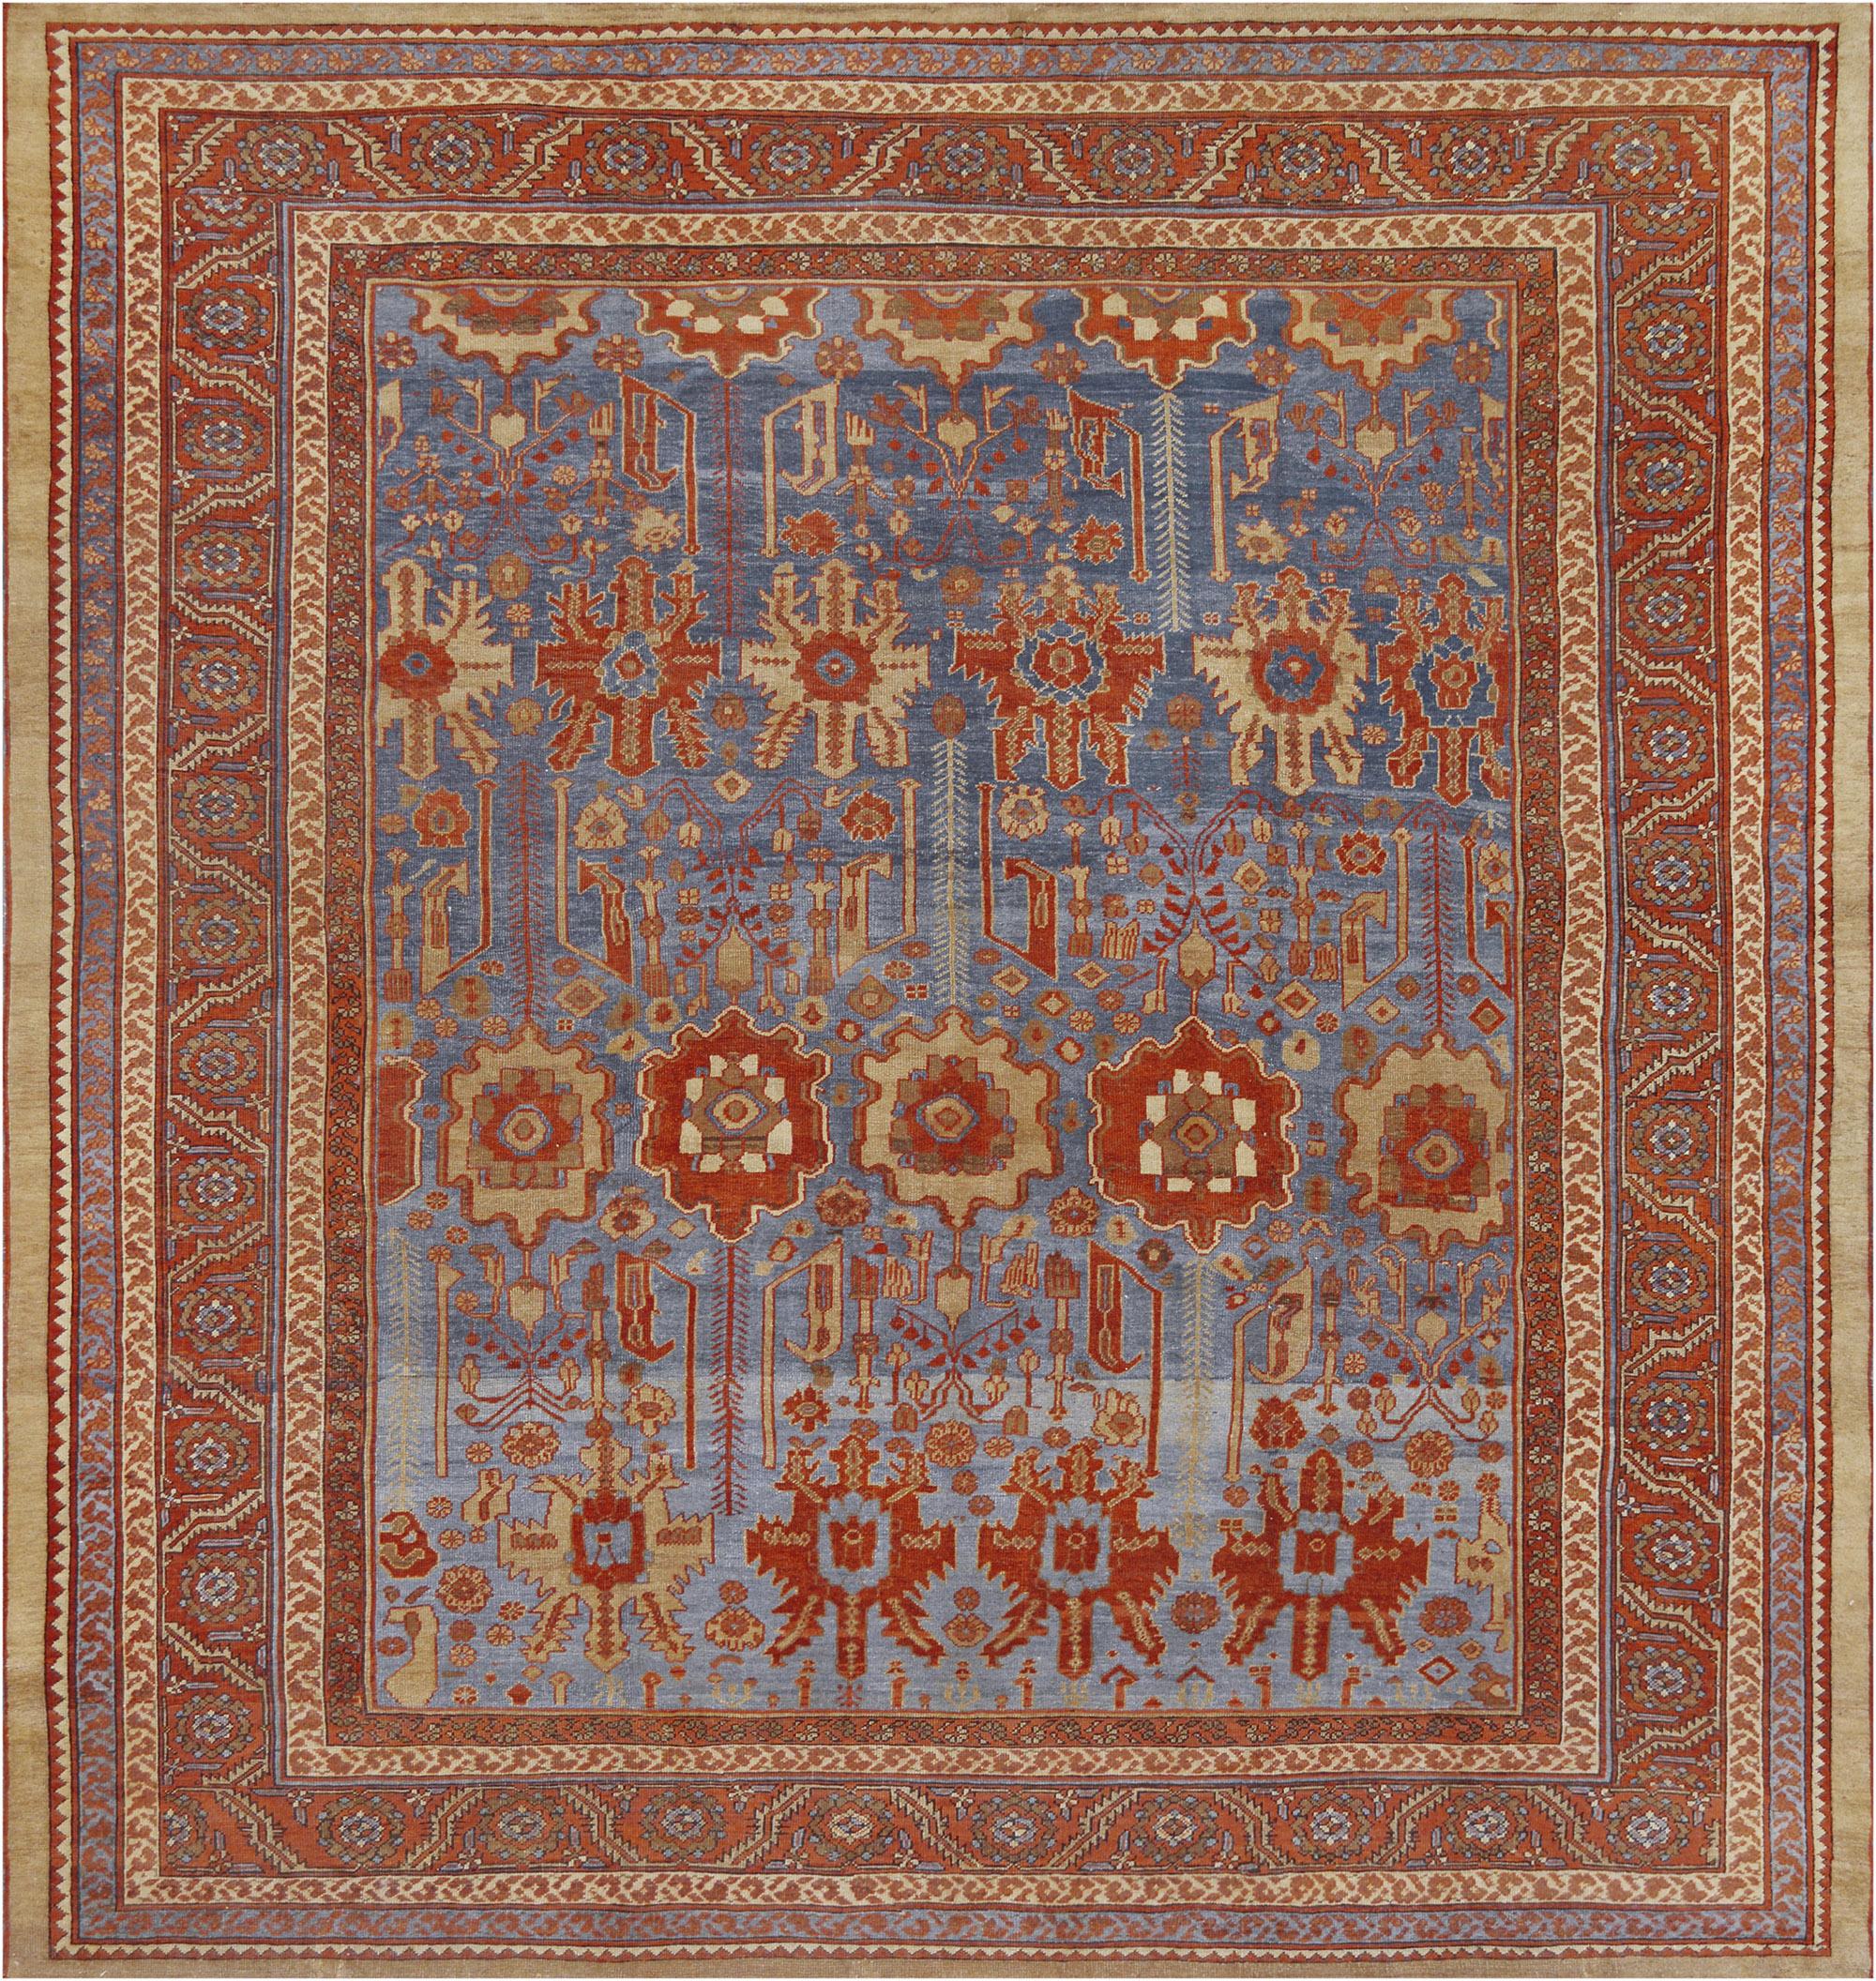 This traditional handwoven Persian Bakhshaish rug has a shaded ocean blue field counterposed by broad geometric palmettes issuing complementary floral motif, in a coral red border of scrolling geometric rosettes between a profusion of delicate vine